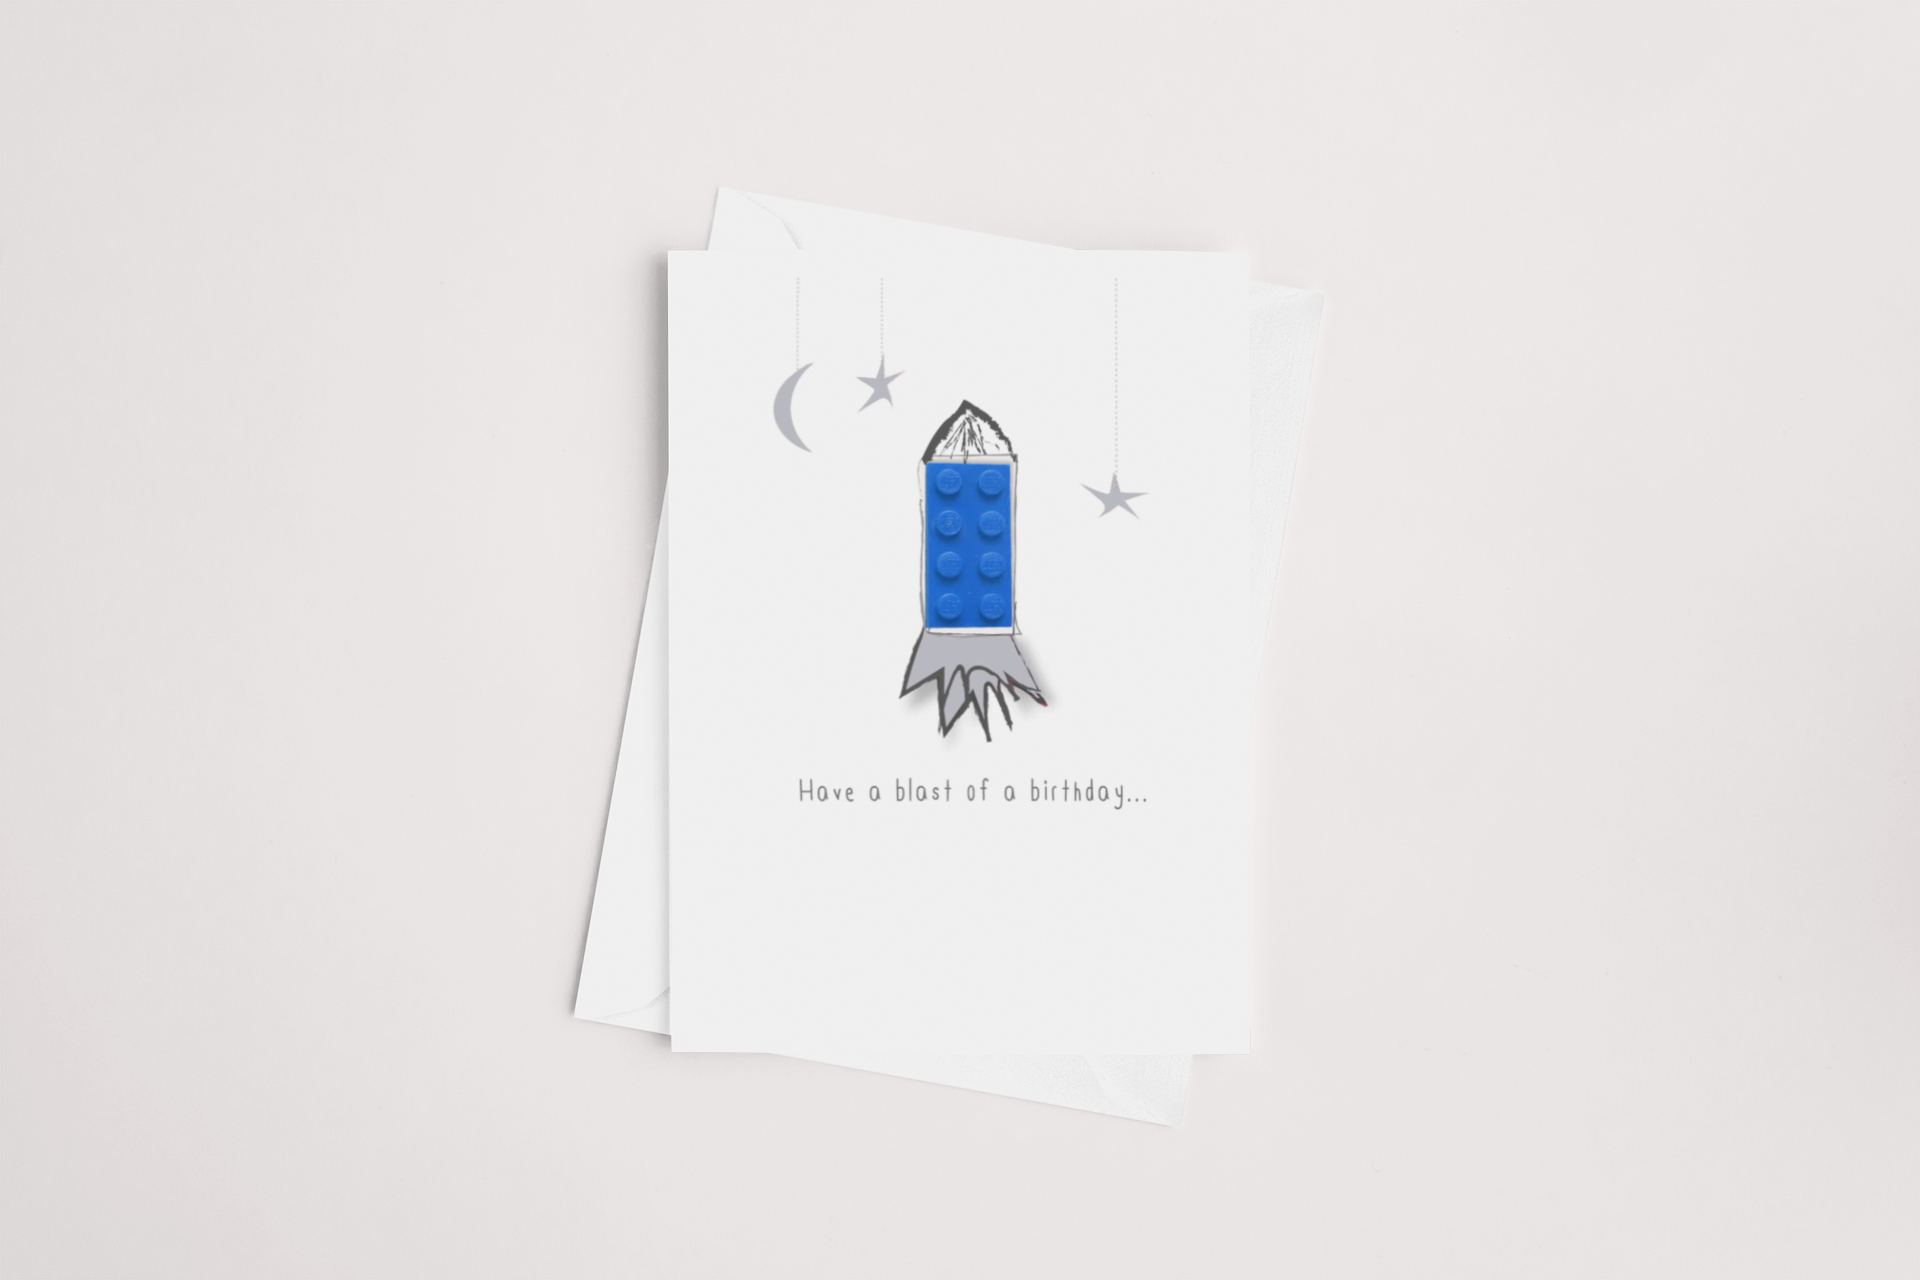 A playful greeting card featuring an illustration of a Lego rocket with the punny message "have a blast of a birthday..." suggesting a fun and high-spirited celebration. Blank inside for your personal message, by icandy.